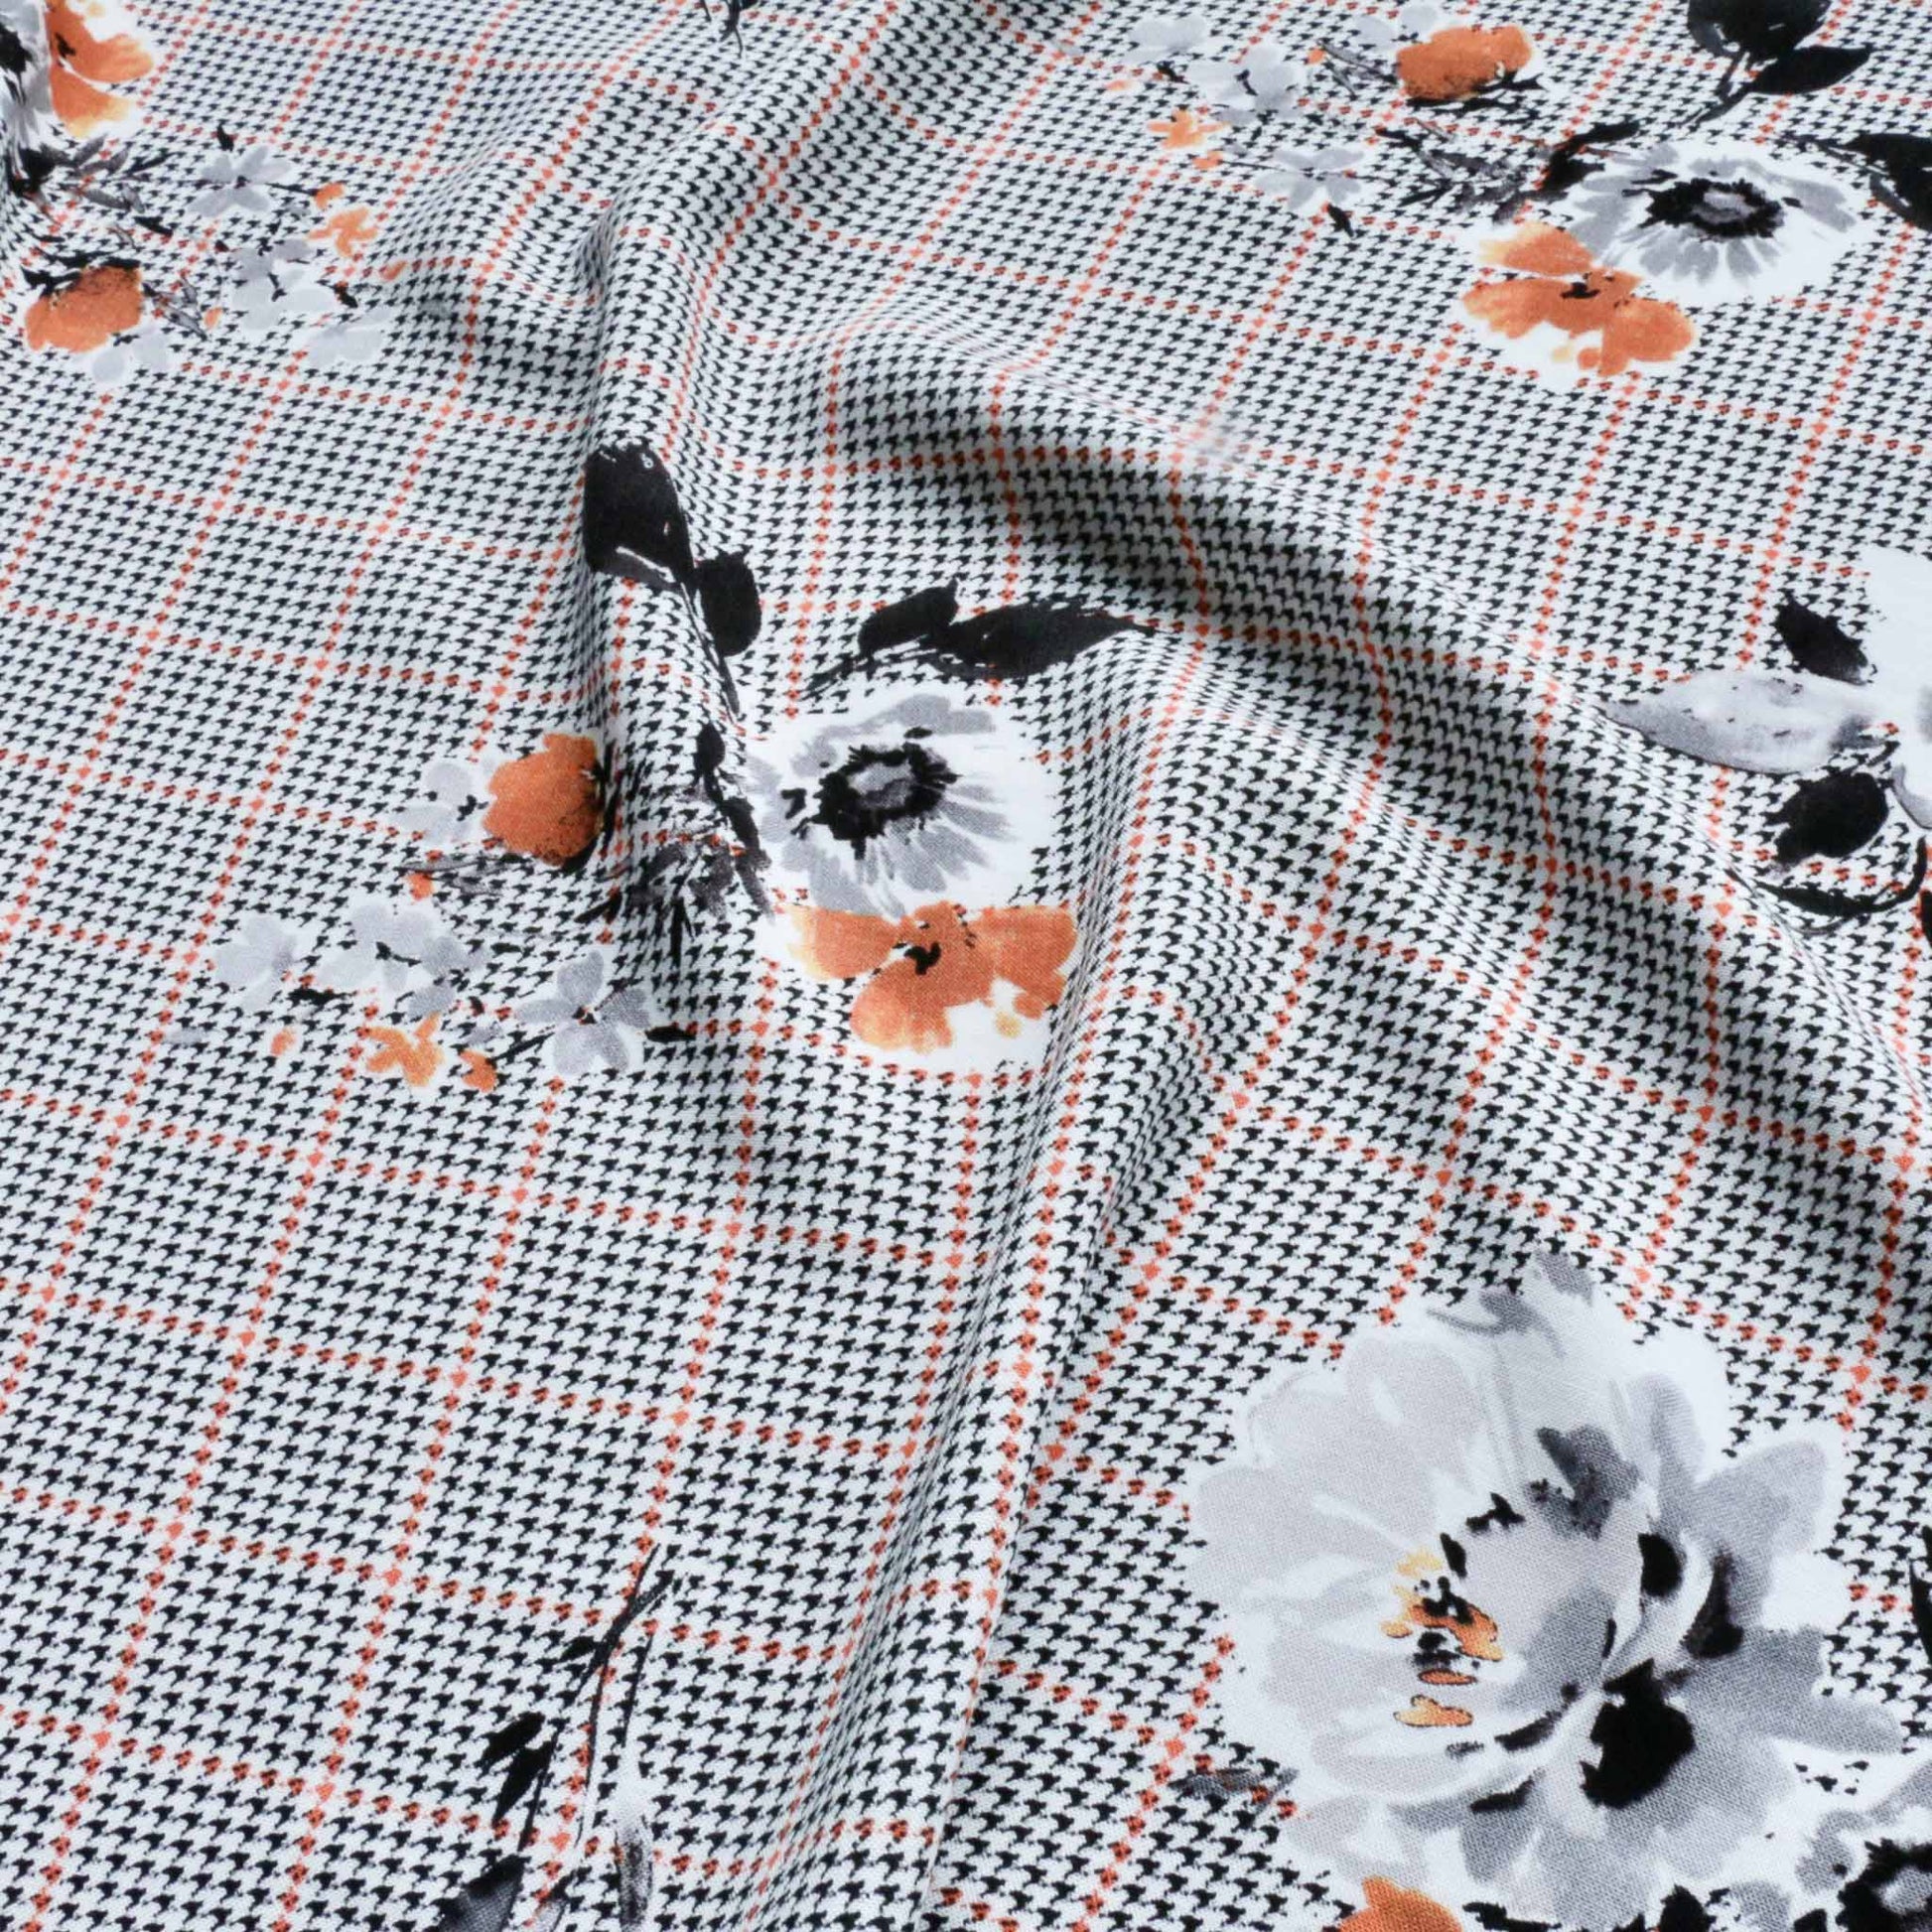 black houndstooth patterned viscose challis dressmaking fabric with flowers printed in white and orange